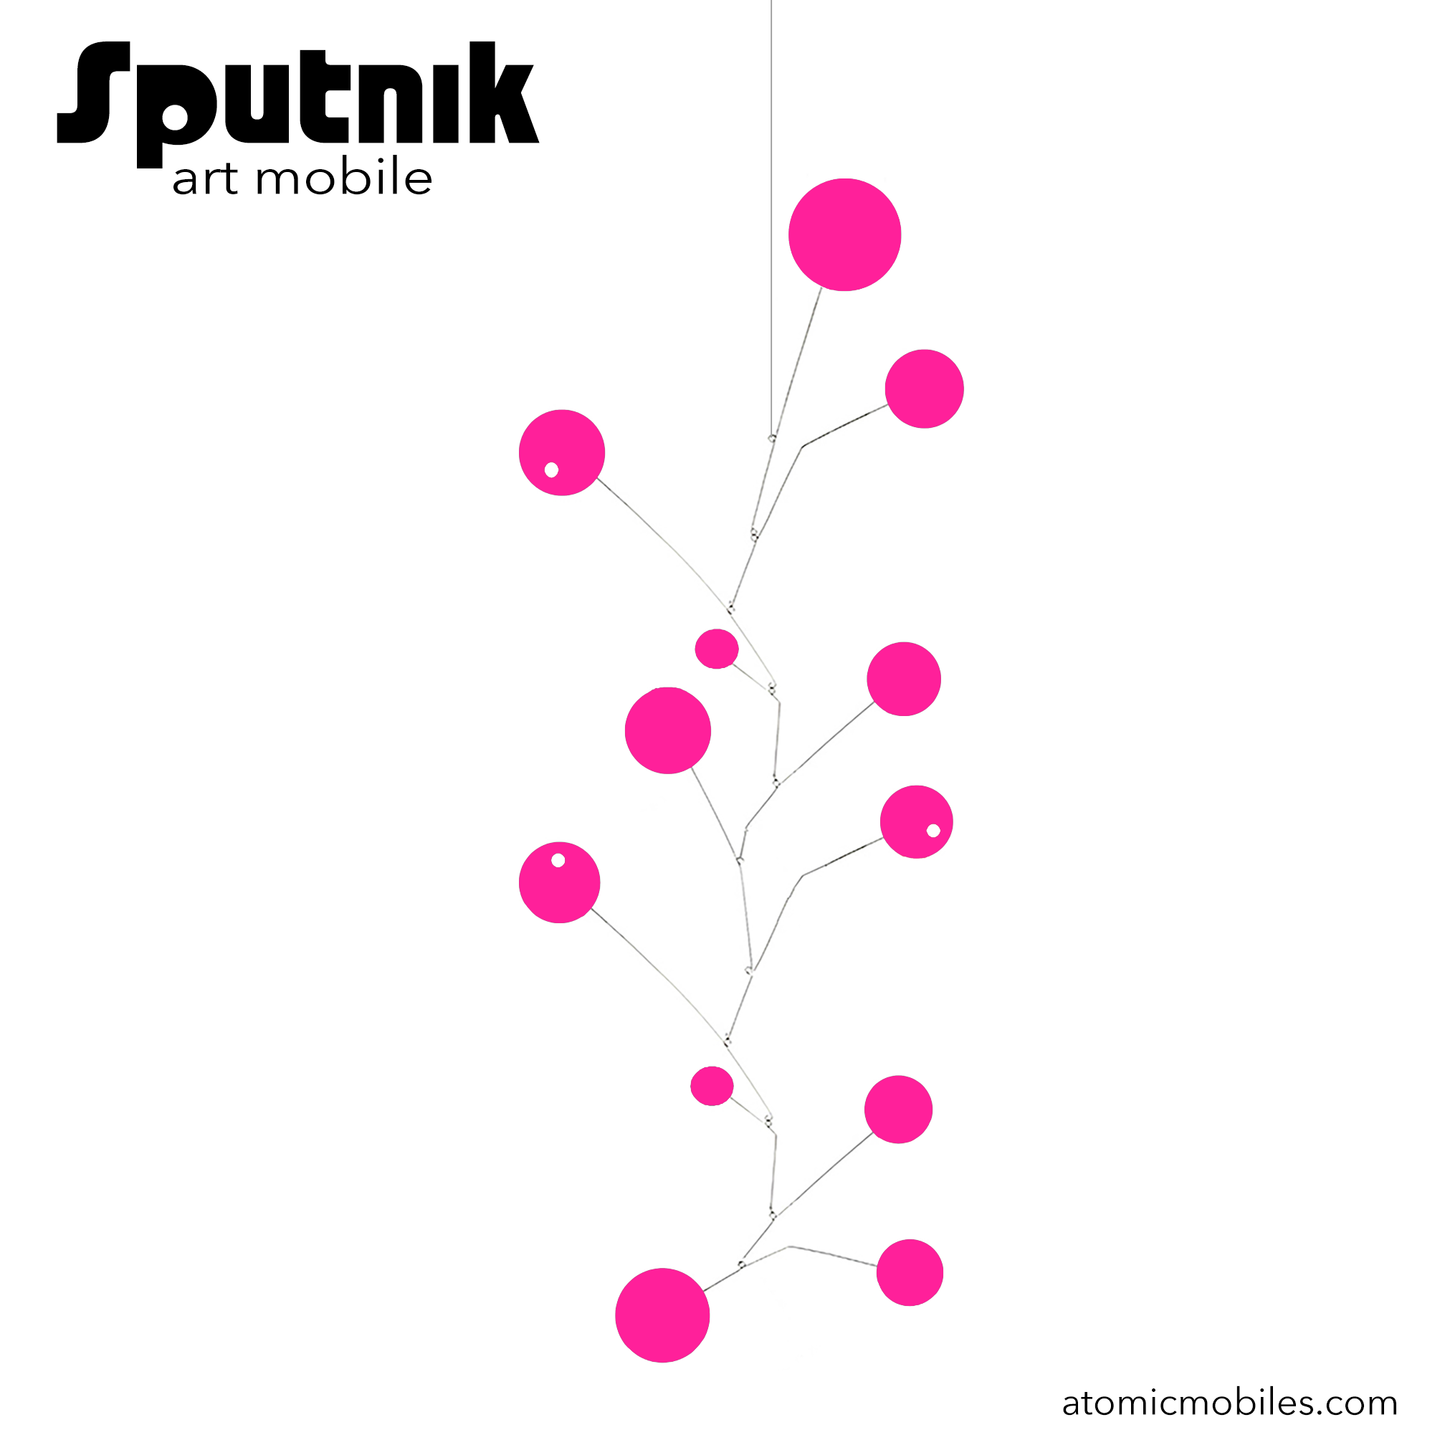 Sputnik kinetic art mobile in Intense Hot Barbie Dream House Pink - hanging art mobile in MOD mid century modern style for your Barbiecore home decor by AtomicMobiles.com